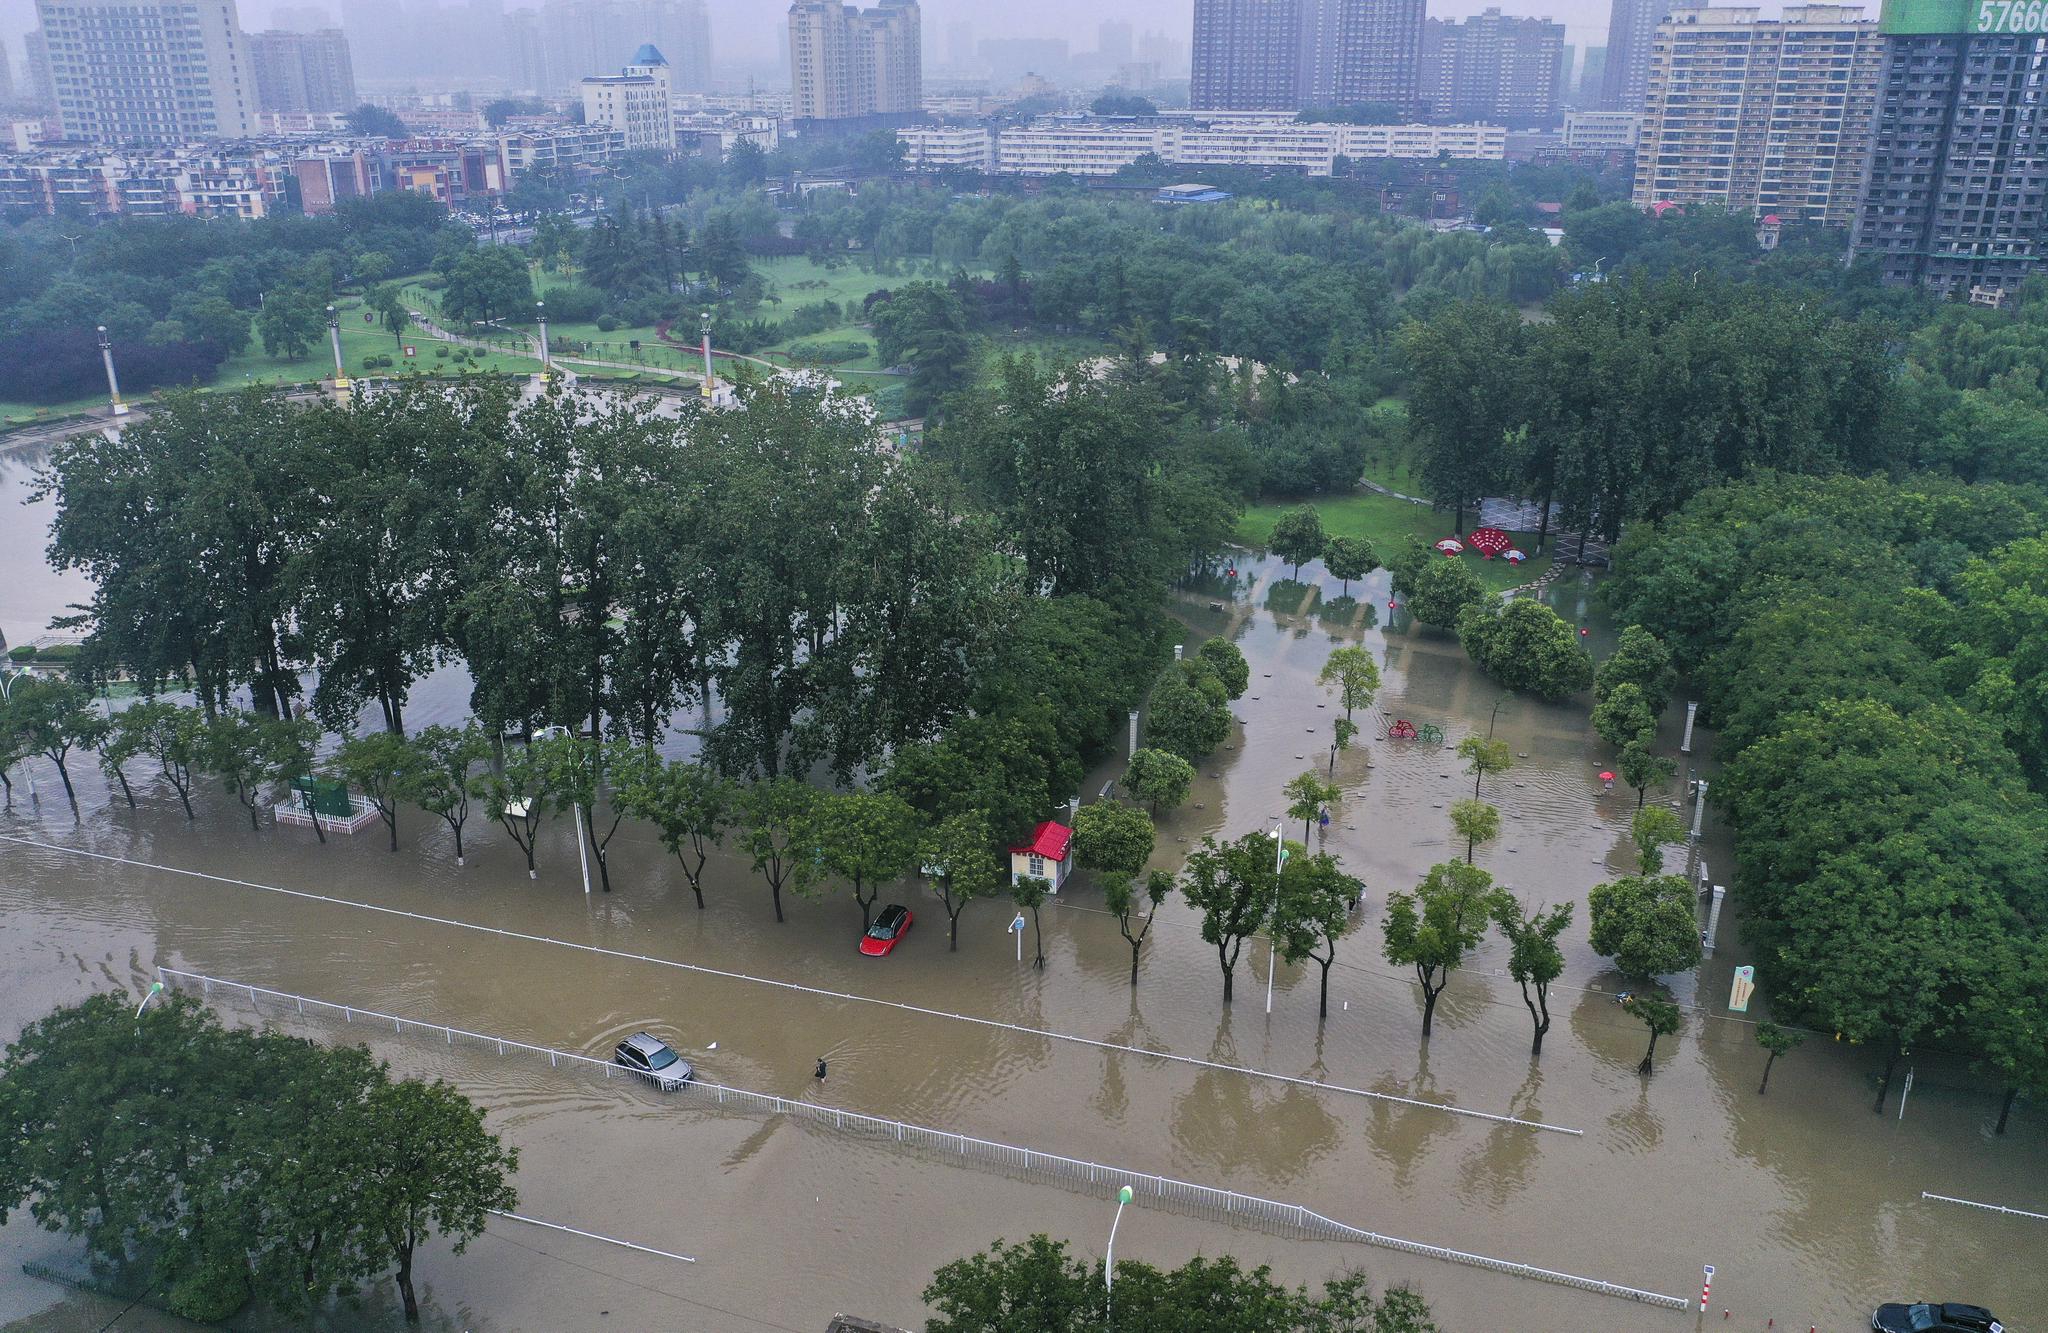 Xinxiang recently suffered floods. Picture from Xinhua News Agency